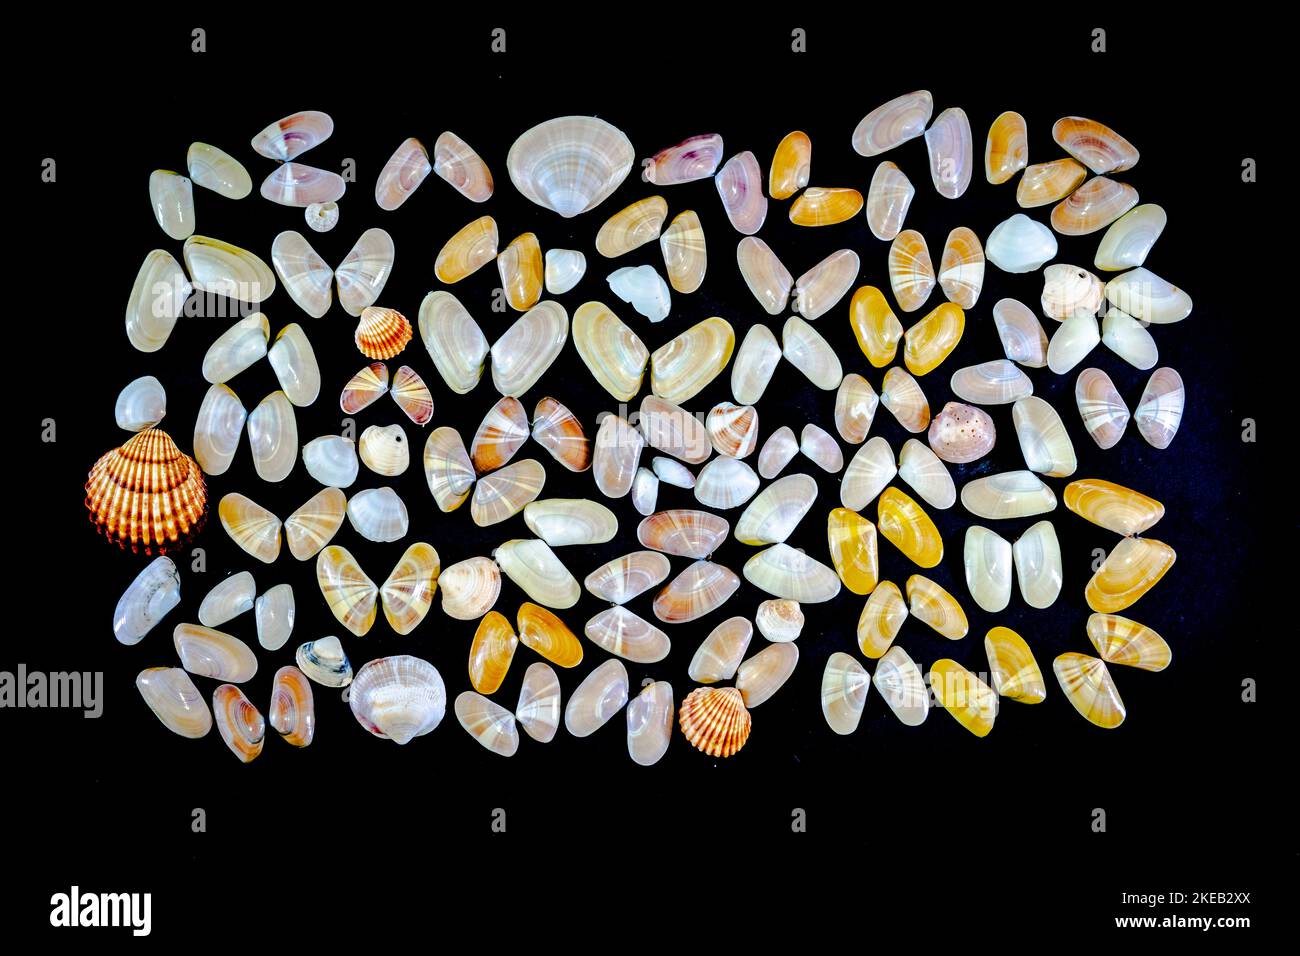 Collection of Donax Variabilis or coquina saltwater clam mollusc opened shells and seashells. Macro-photography in dark background of a variety of dif Stock Photo